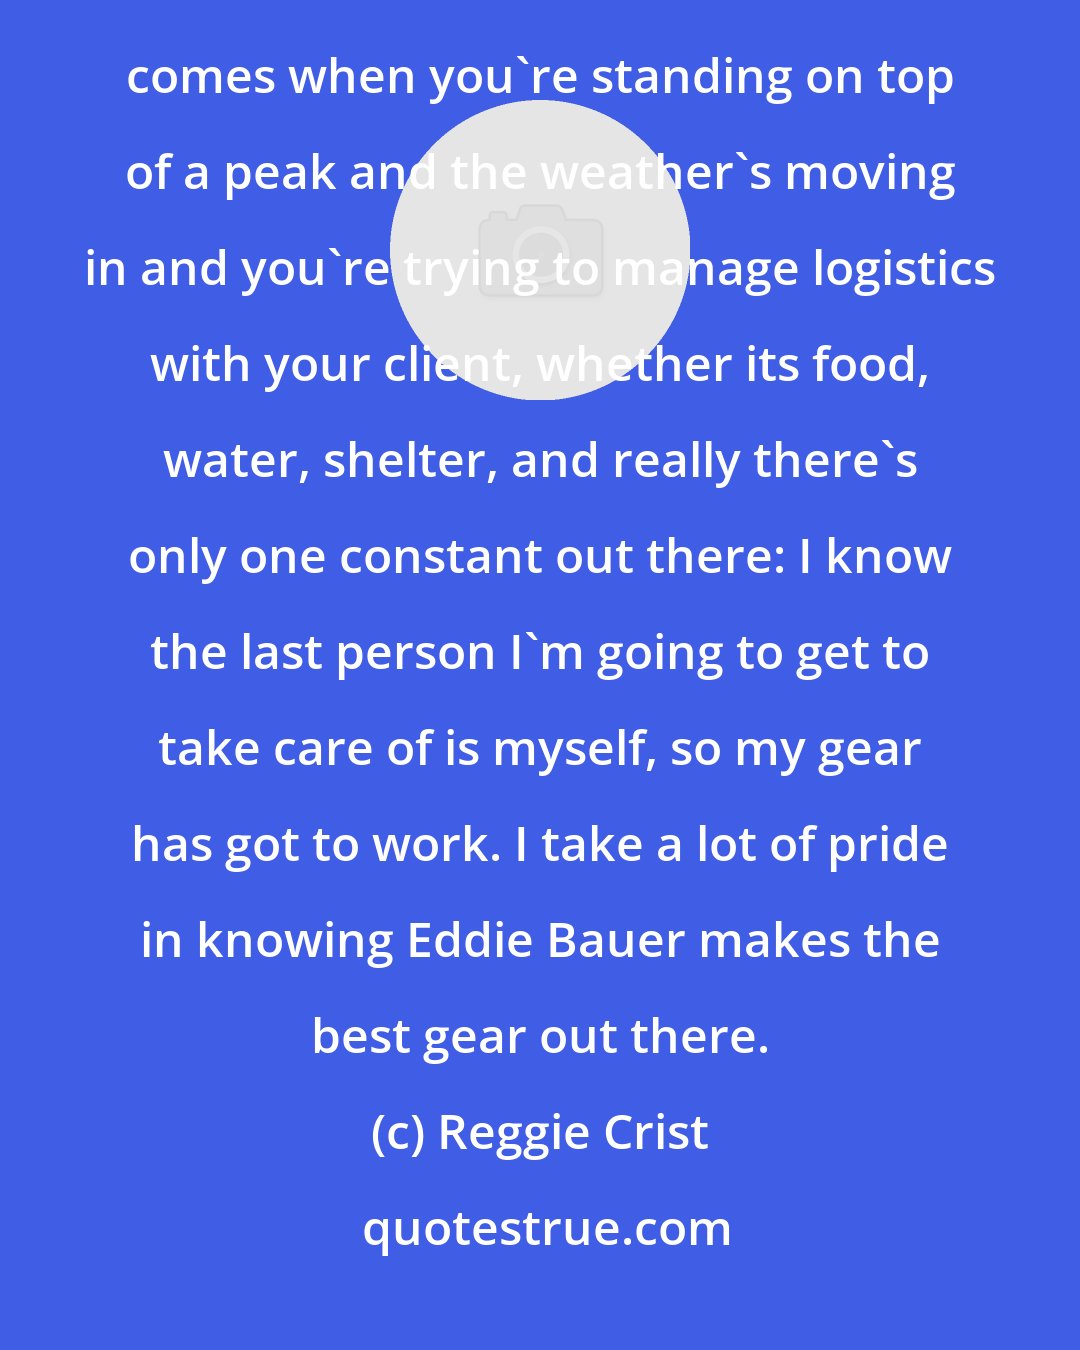 Reggie Crist: Winning awards is great. Everyone wants to put a feather in their cap but for me the ultimate validation comes when you're standing on top of a peak and the weather's moving in and you're trying to manage logistics with your client, whether its food, water, shelter, and really there's only one constant out there: I know the last person I'm going to get to take care of is myself, so my gear has got to work. I take a lot of pride in knowing Eddie Bauer makes the best gear out there.